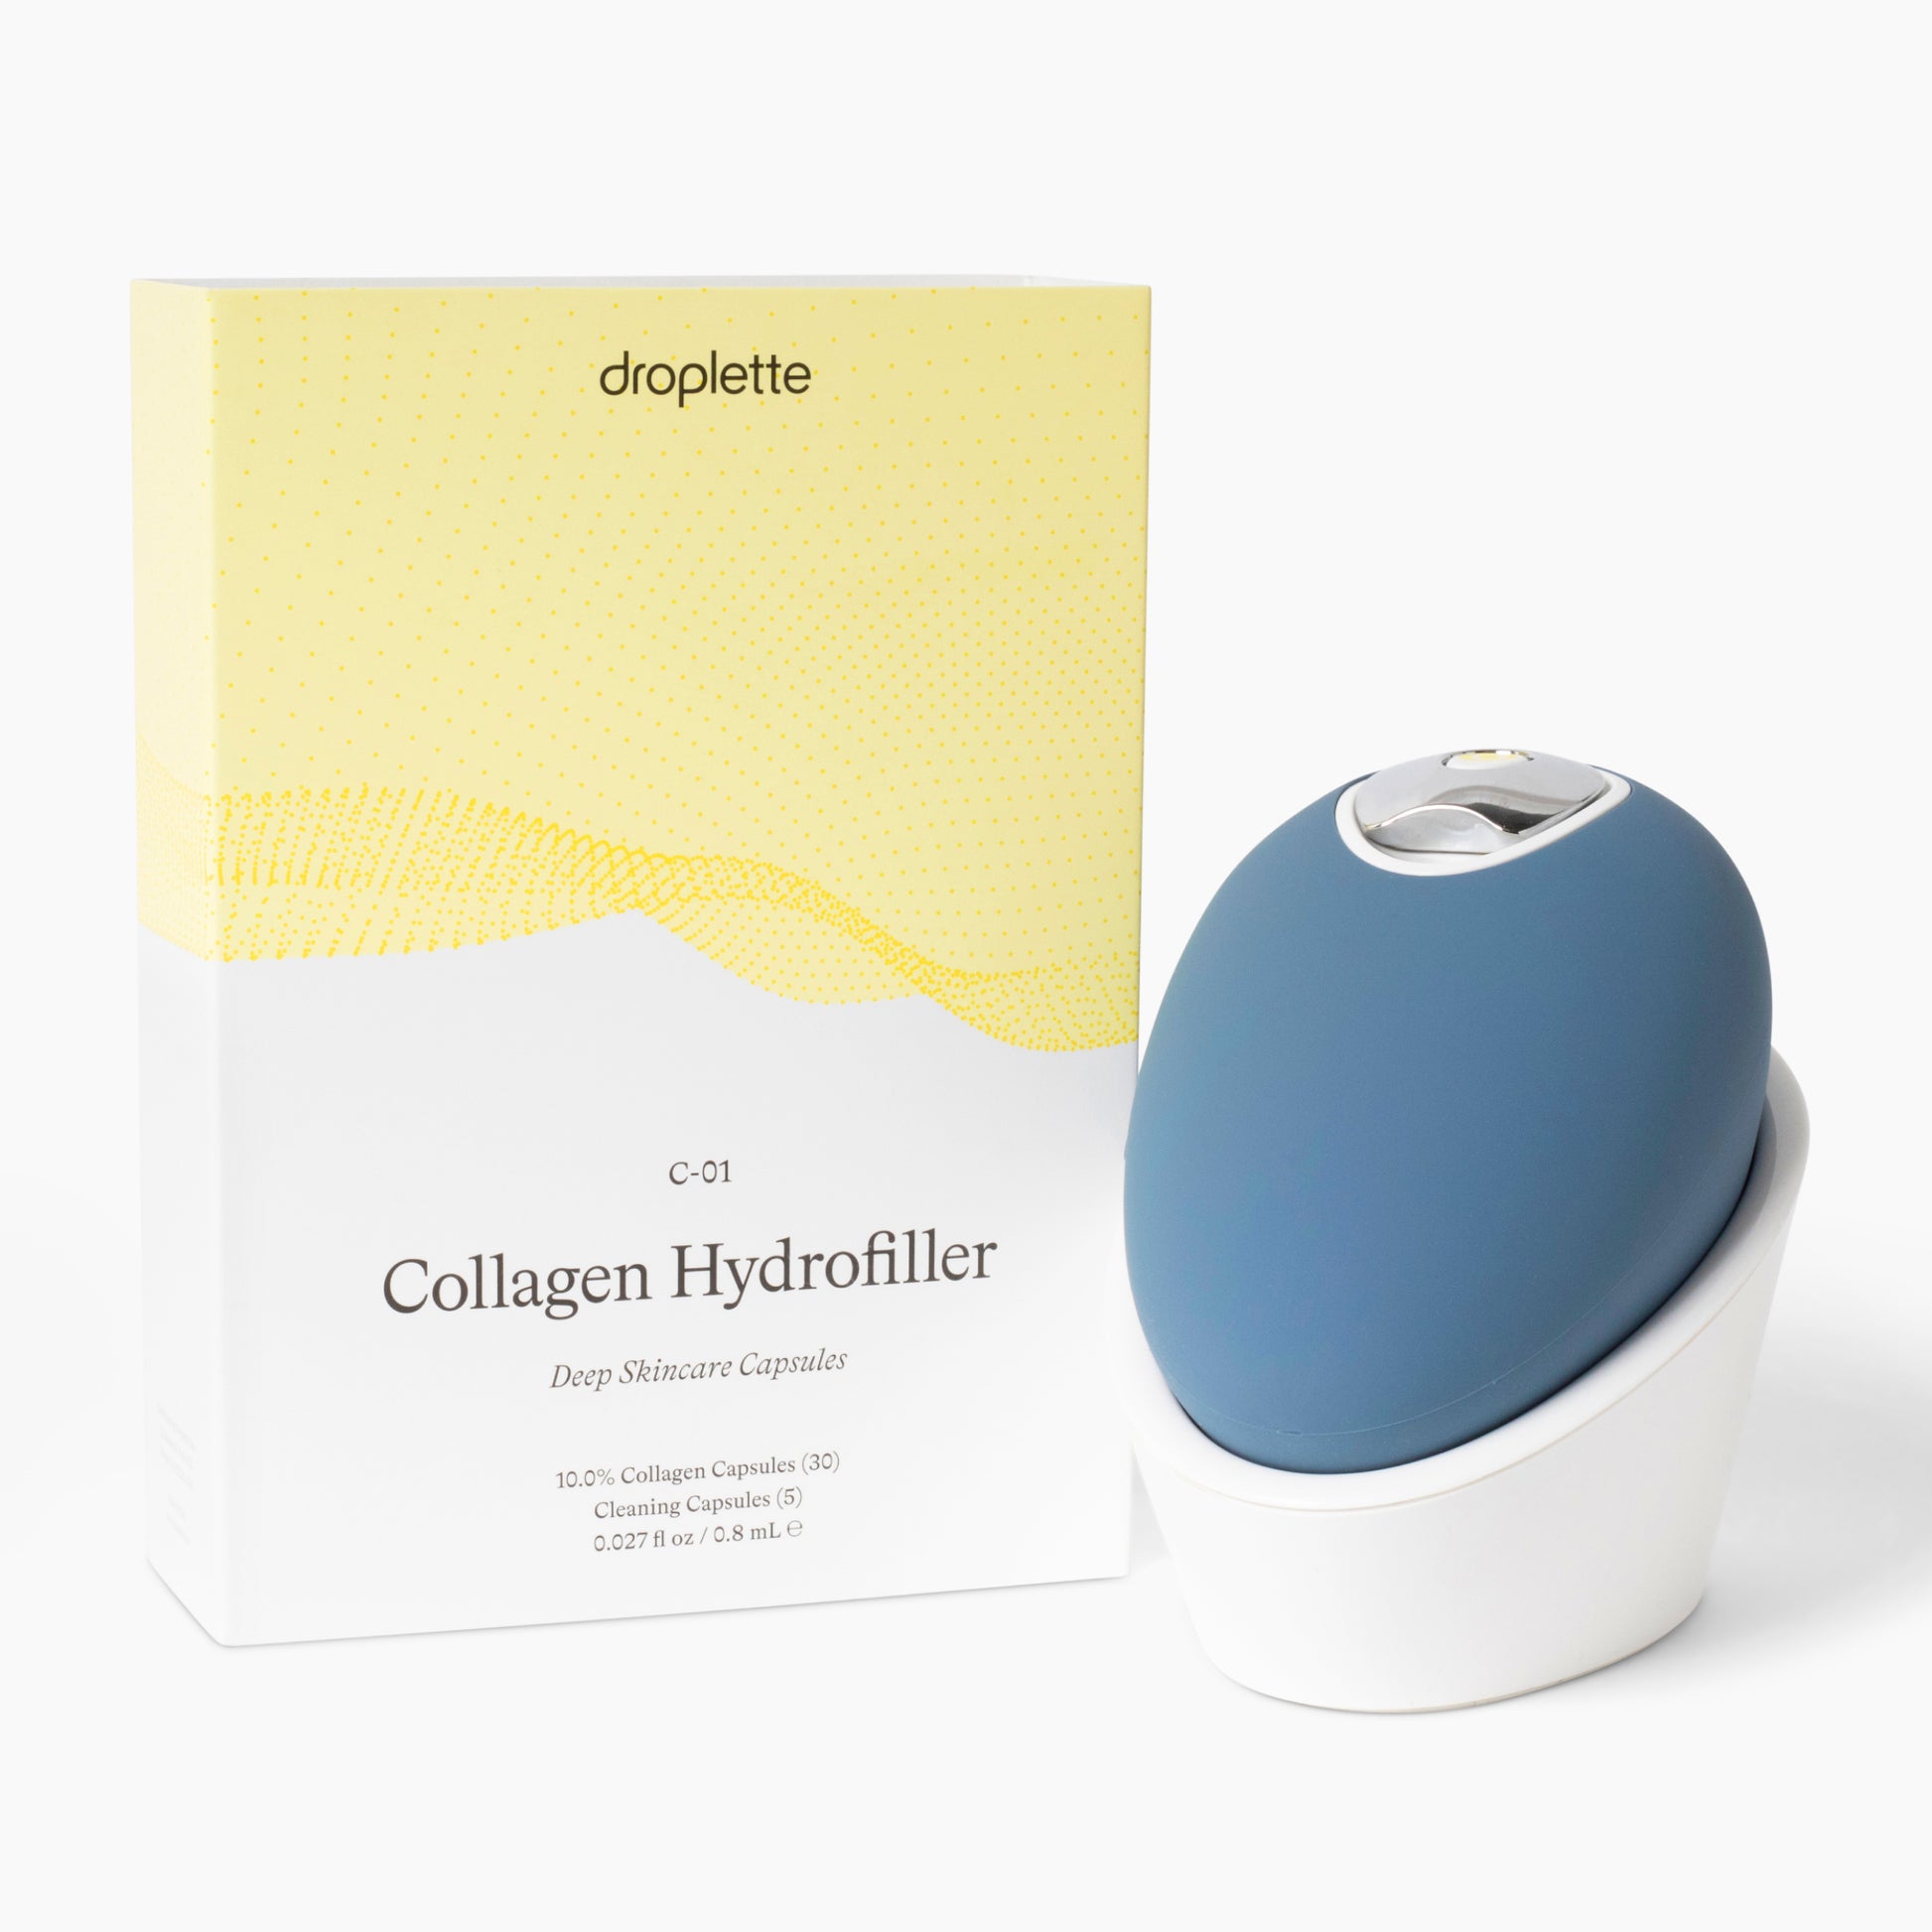 Deluxe Collagen Hydrofiller Set with Droplette Device and Capsule Subscription